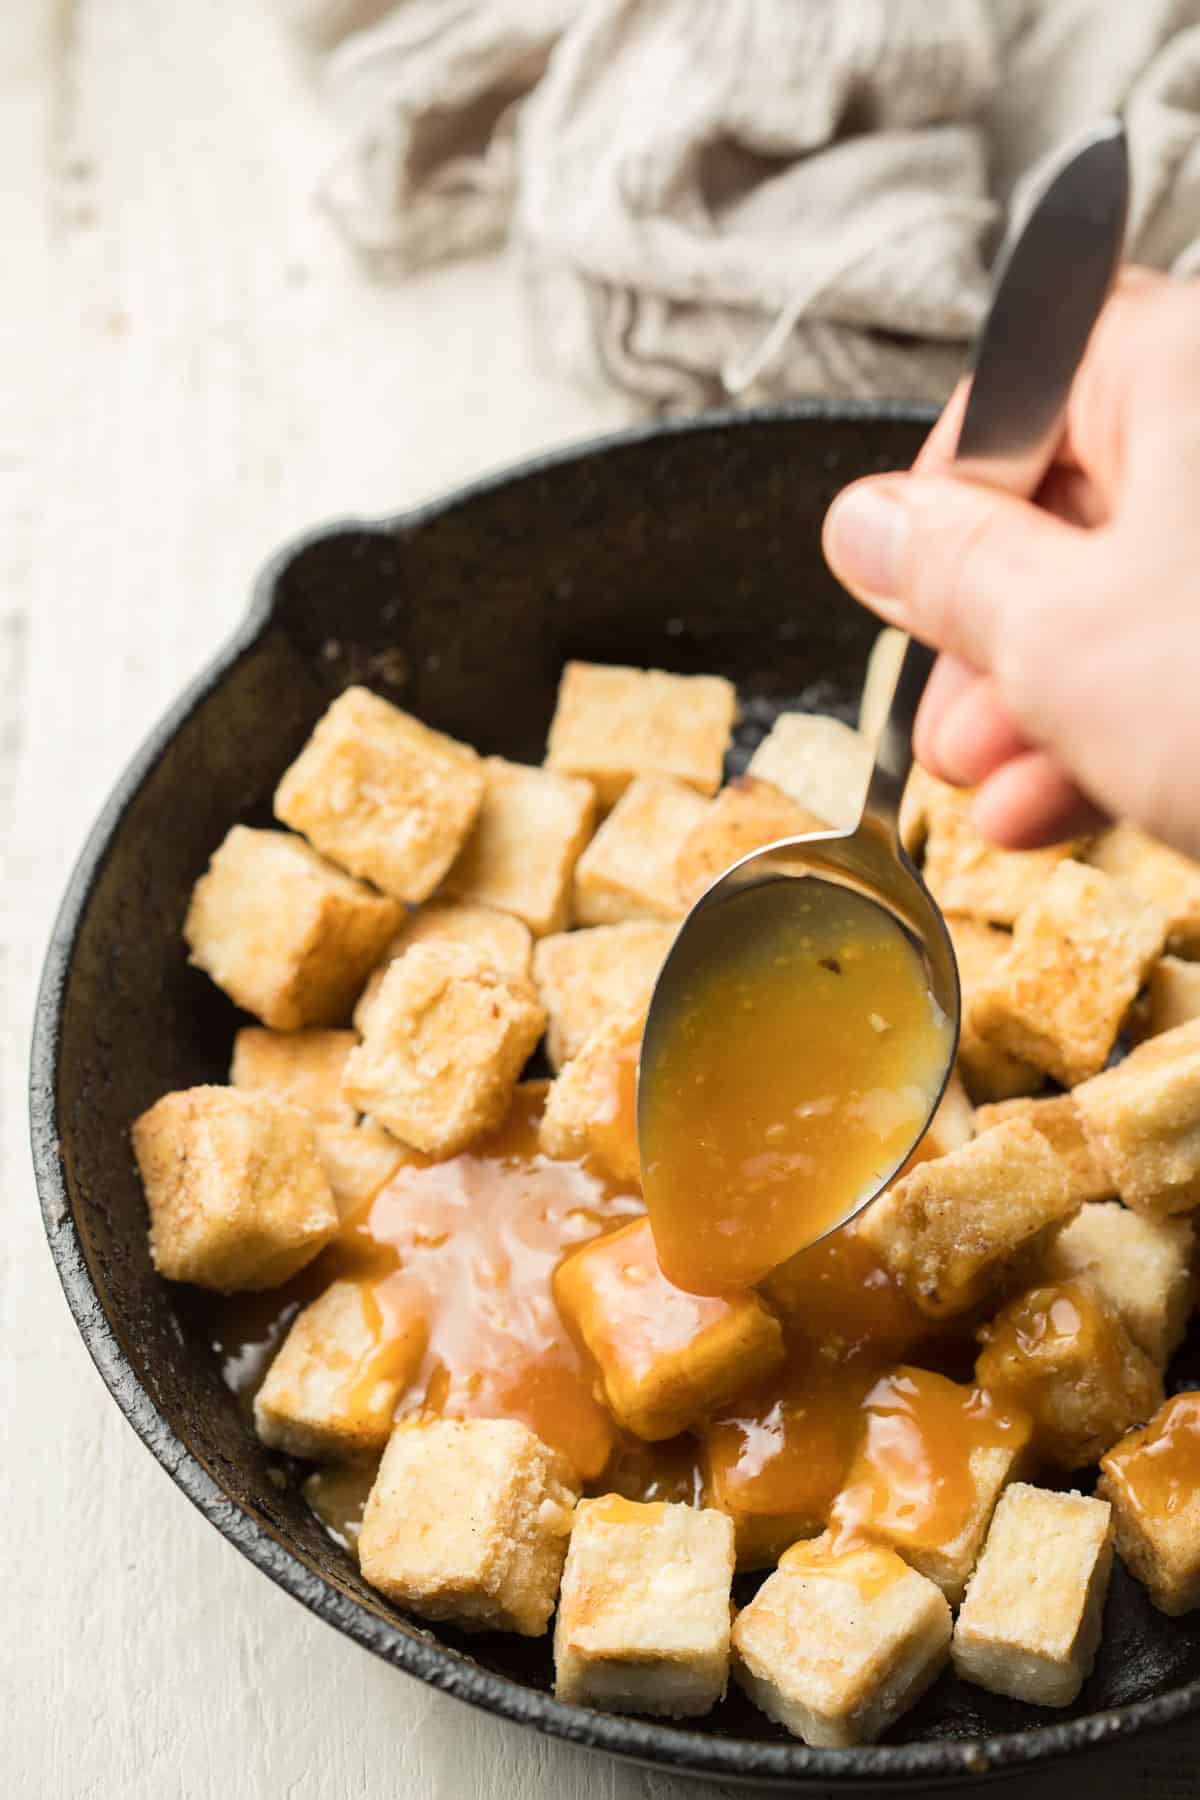 Hand Drizzling Orange Sauce Over a Skillet of Tofu